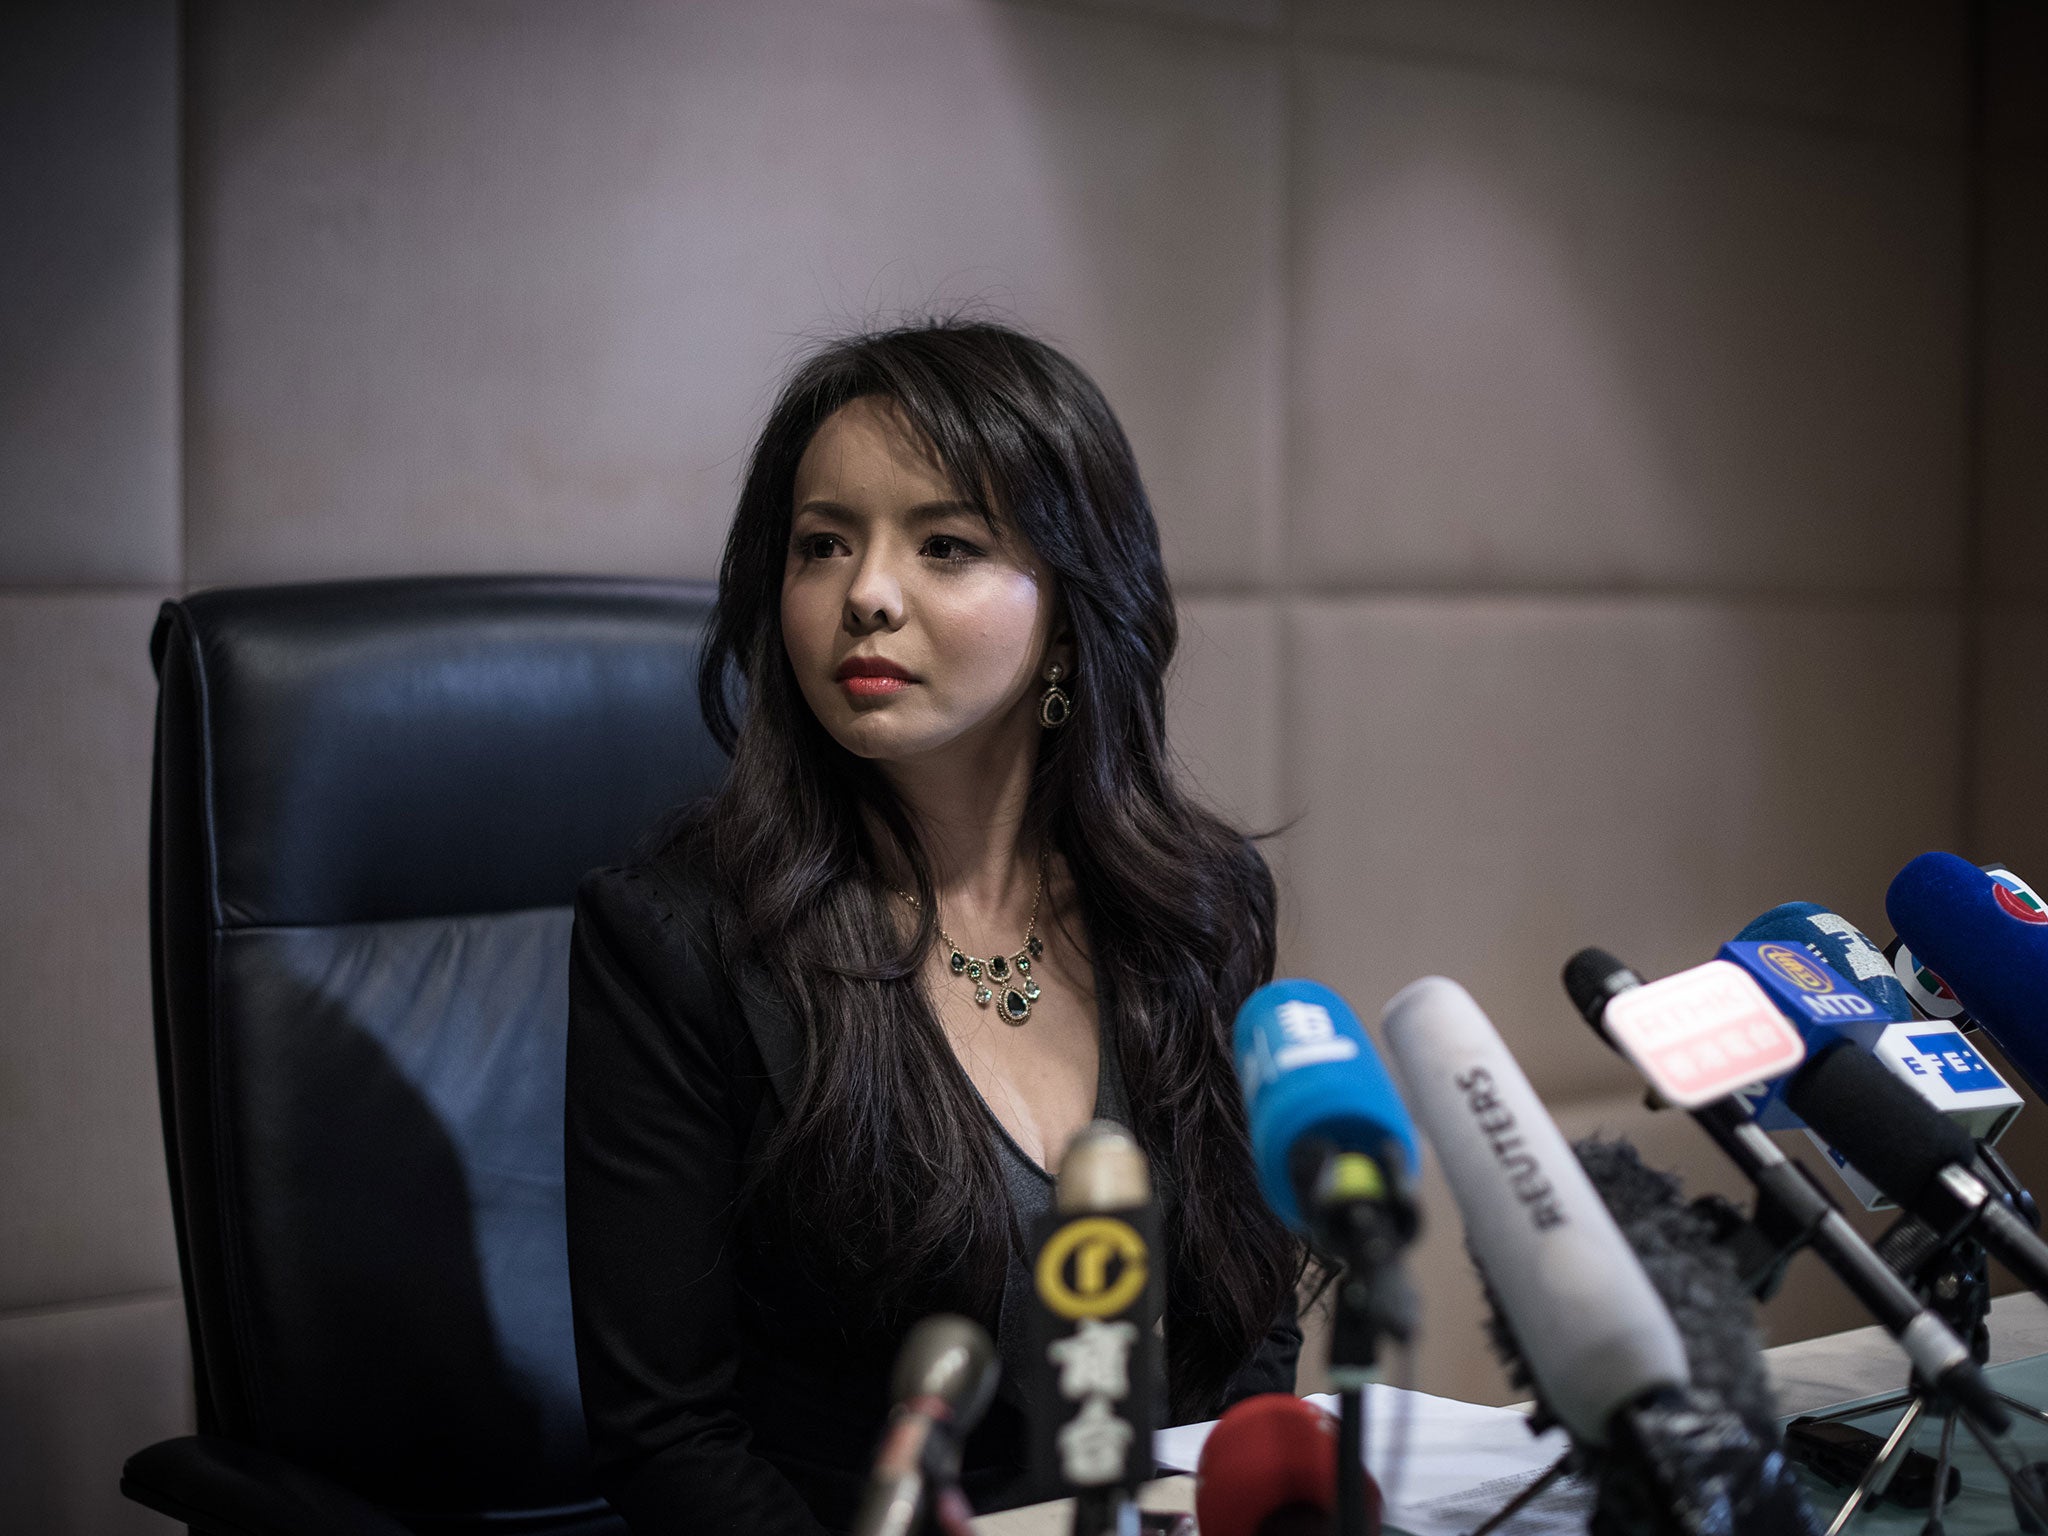 Chineseborn actress and Miss Canada winner Anastasia Lin speaks to the media in Hong Kong after authorities blocked her from travelling to mainland China